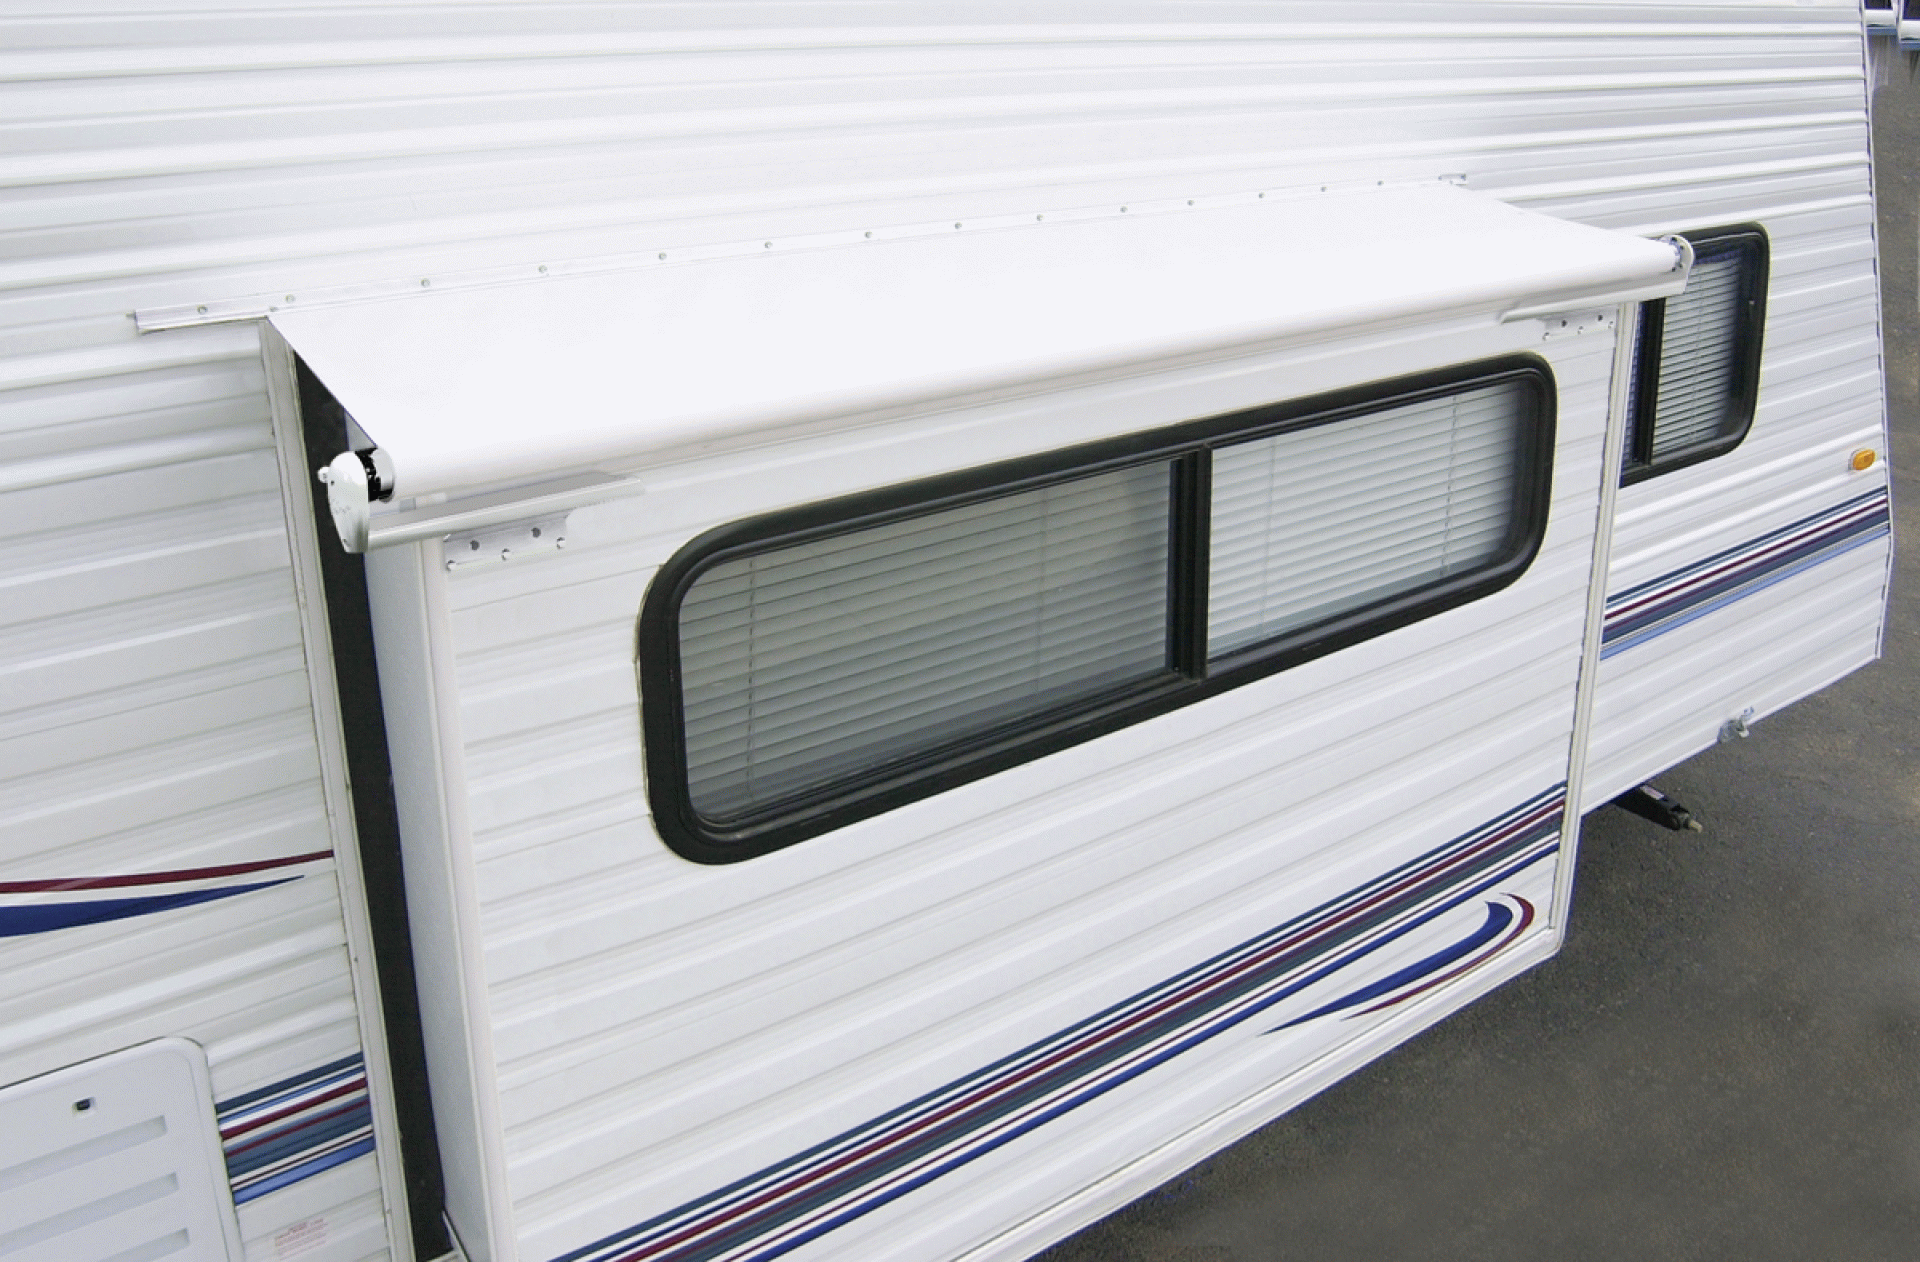 CAREFREE OF COLORADO | LH1450042 | SLIDEOUT COVER AWNING 138" - 145.9" ROOF RANGE WHITE VINYL